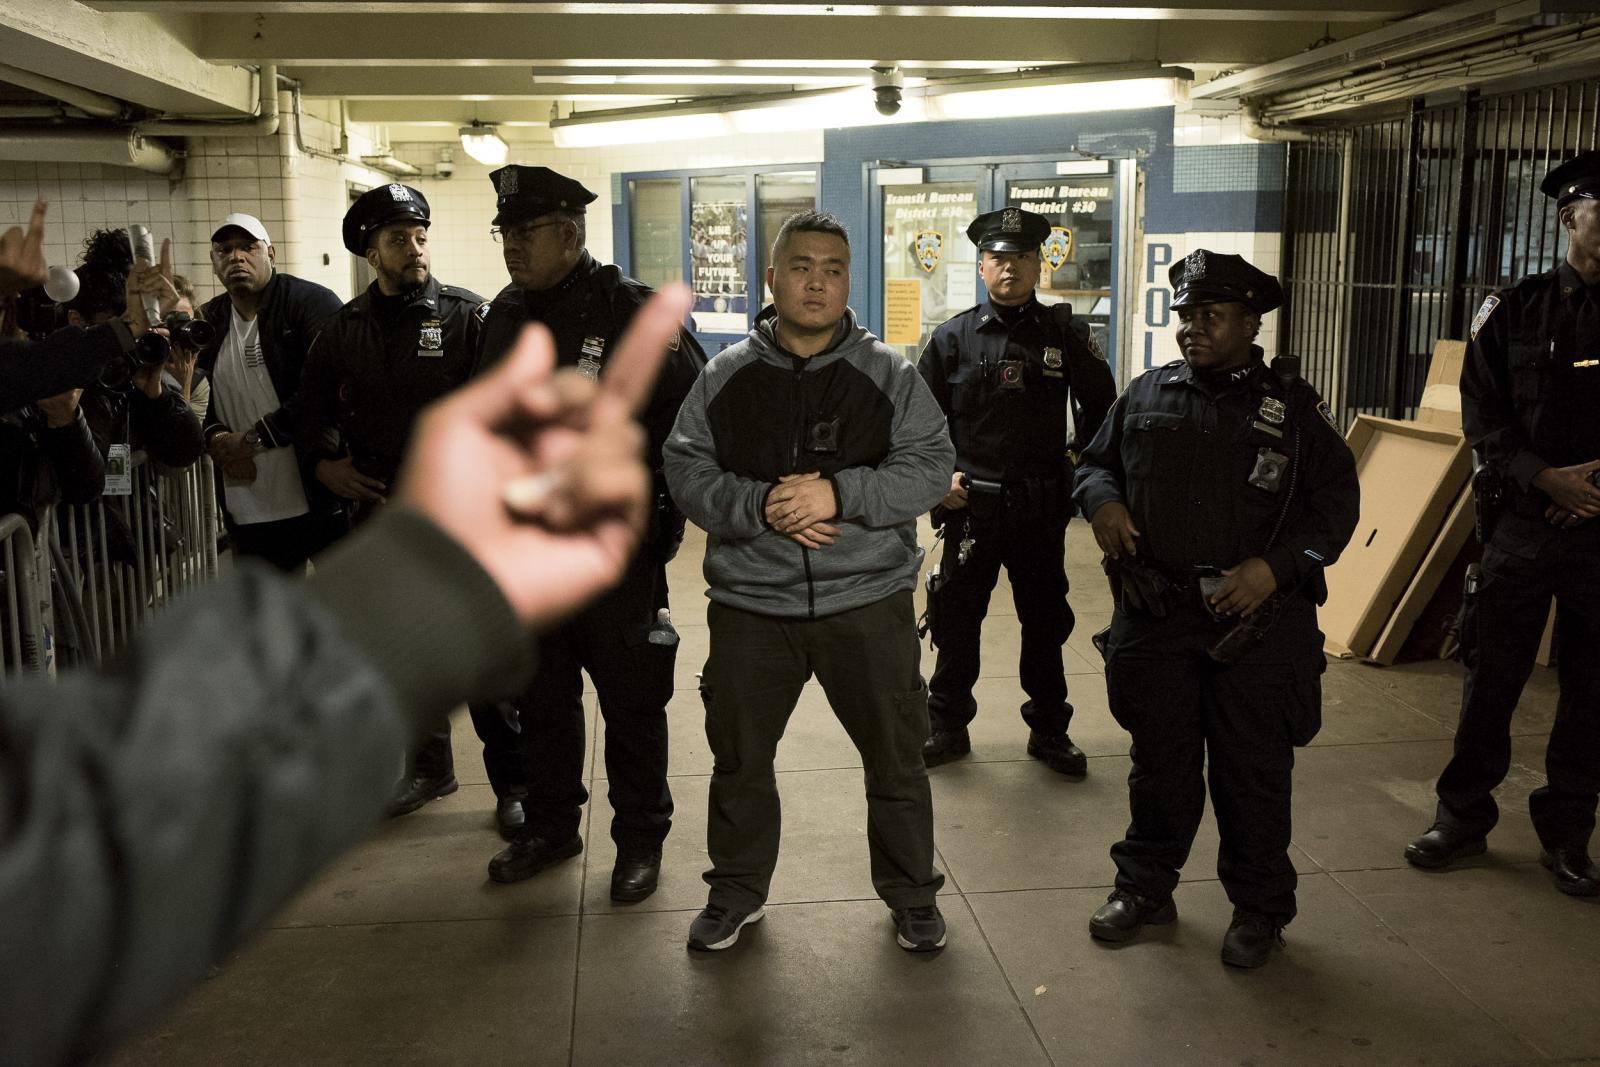 Image from NYC: MidiaNinja - A group of NYPD officers are standing at one of the exits...